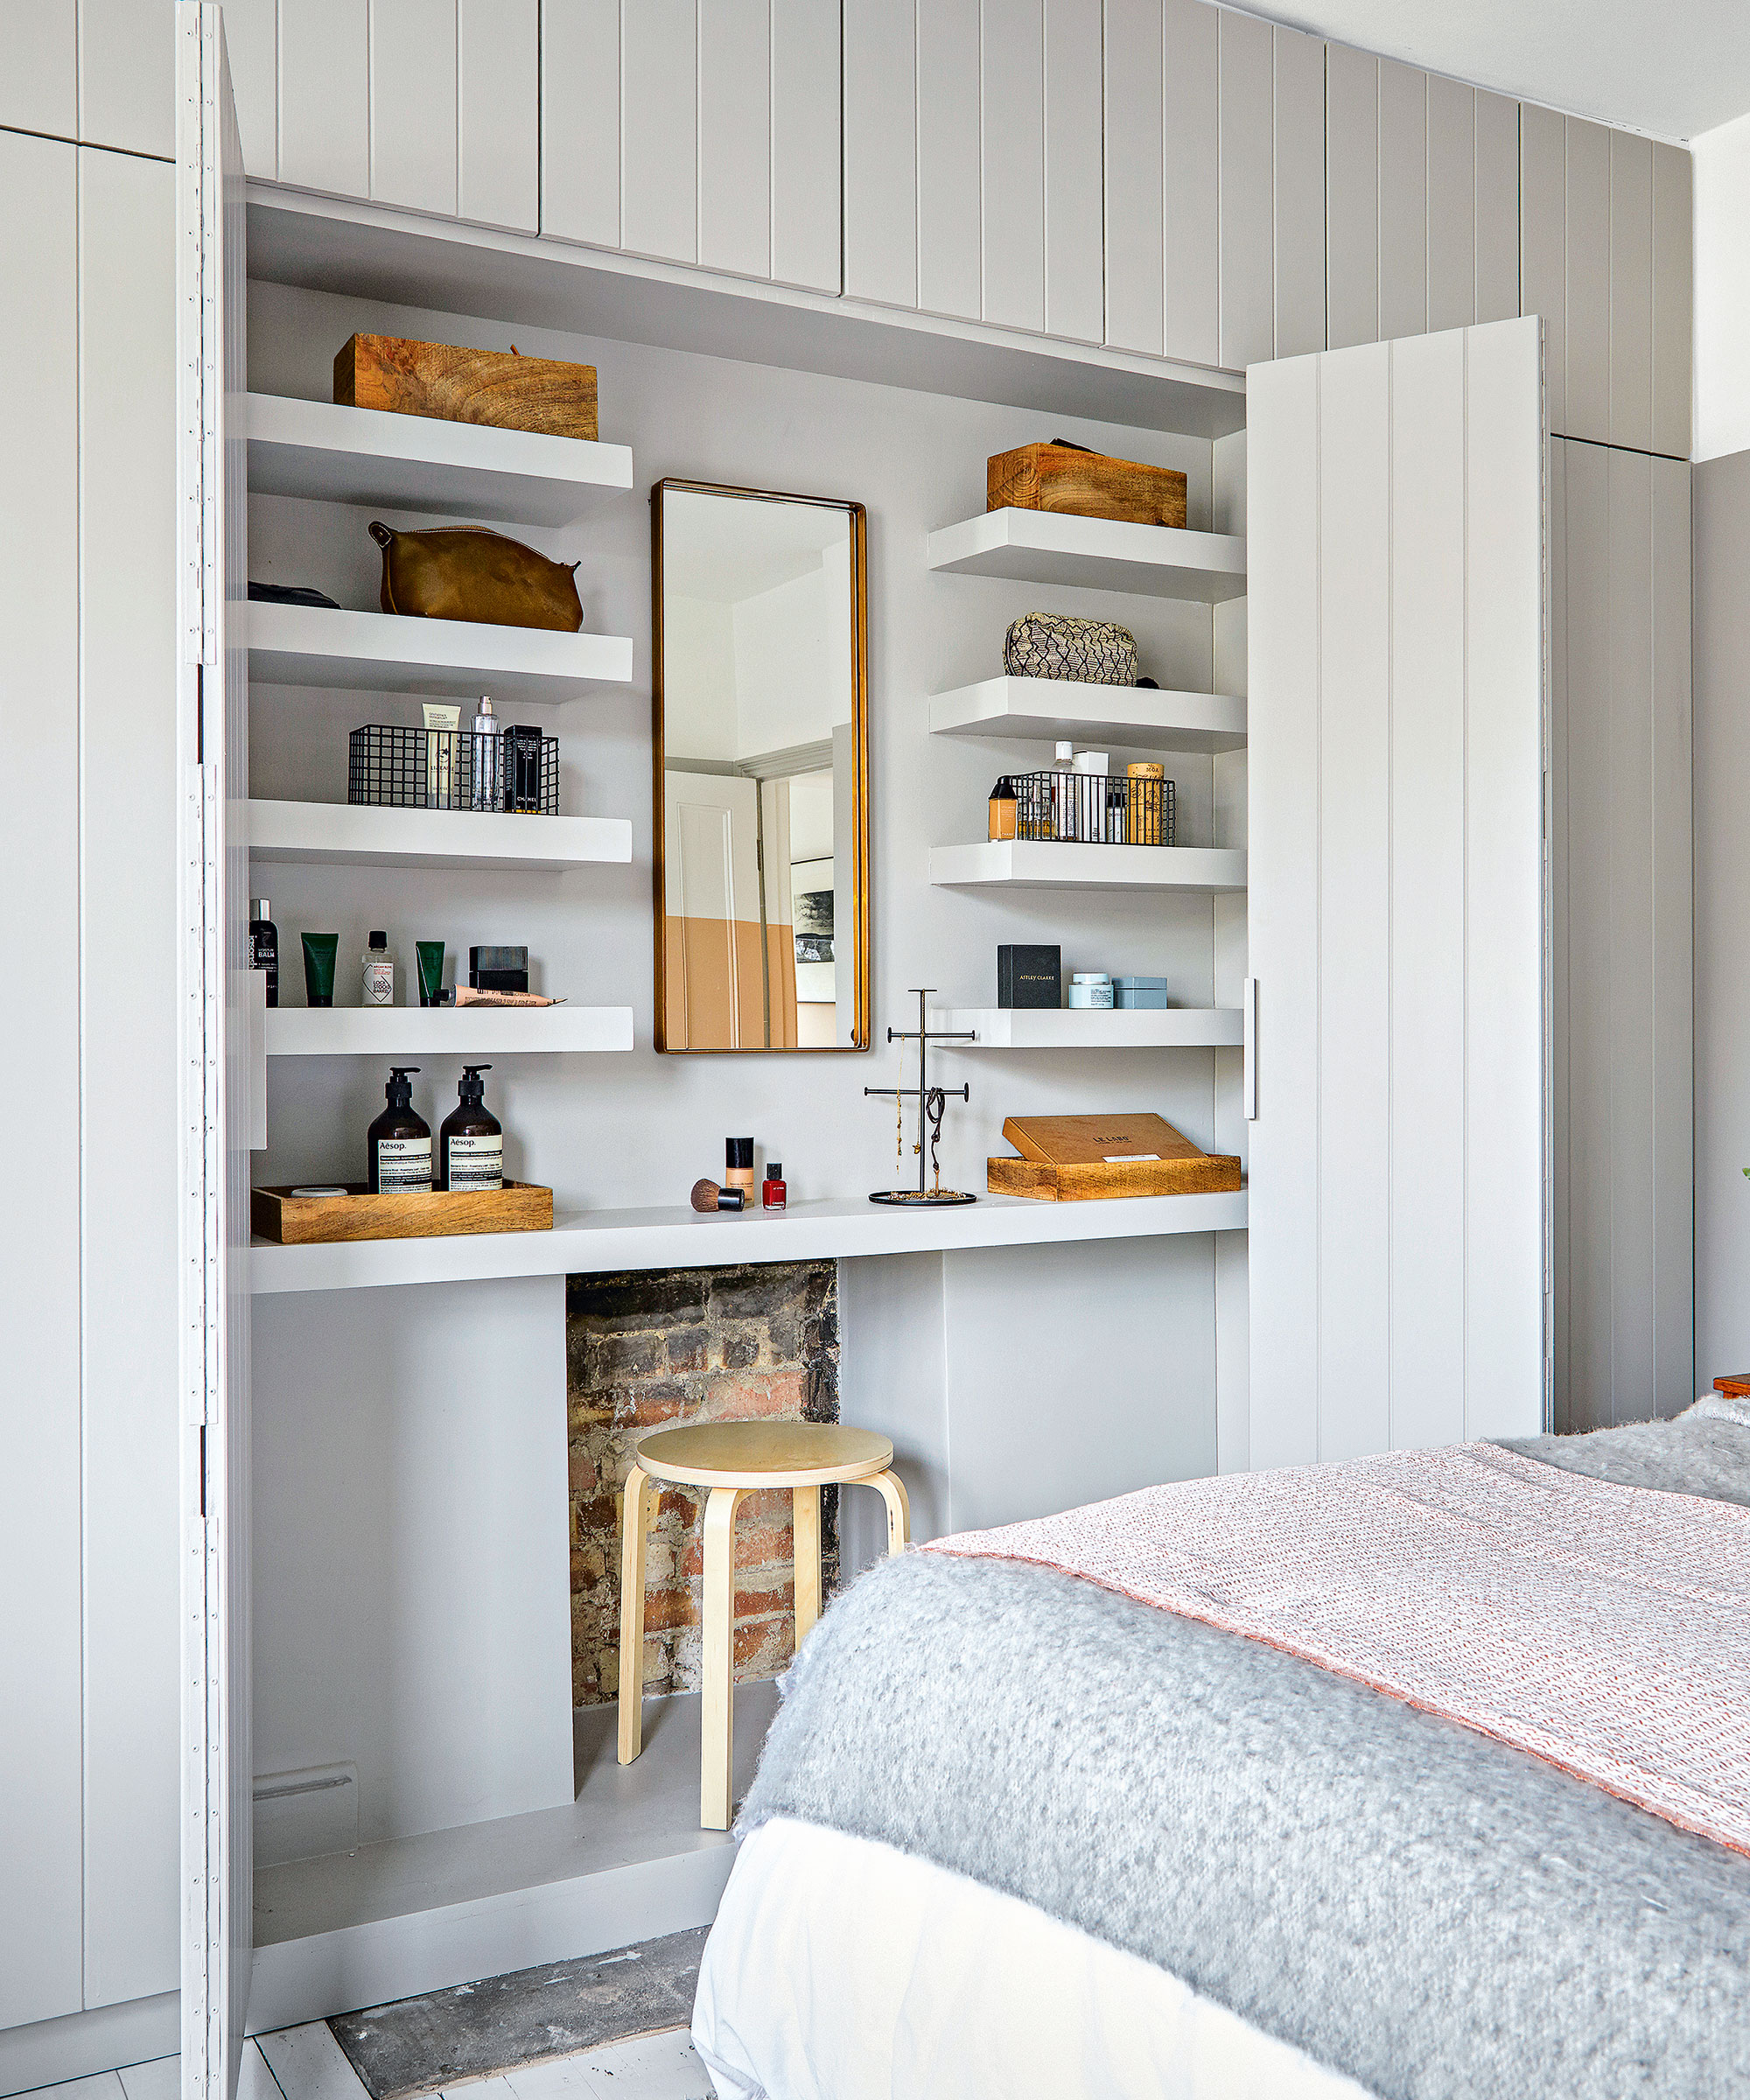 Walk-in closet ideas with open shelf storage and a dressing area in a pale gray bedroom.